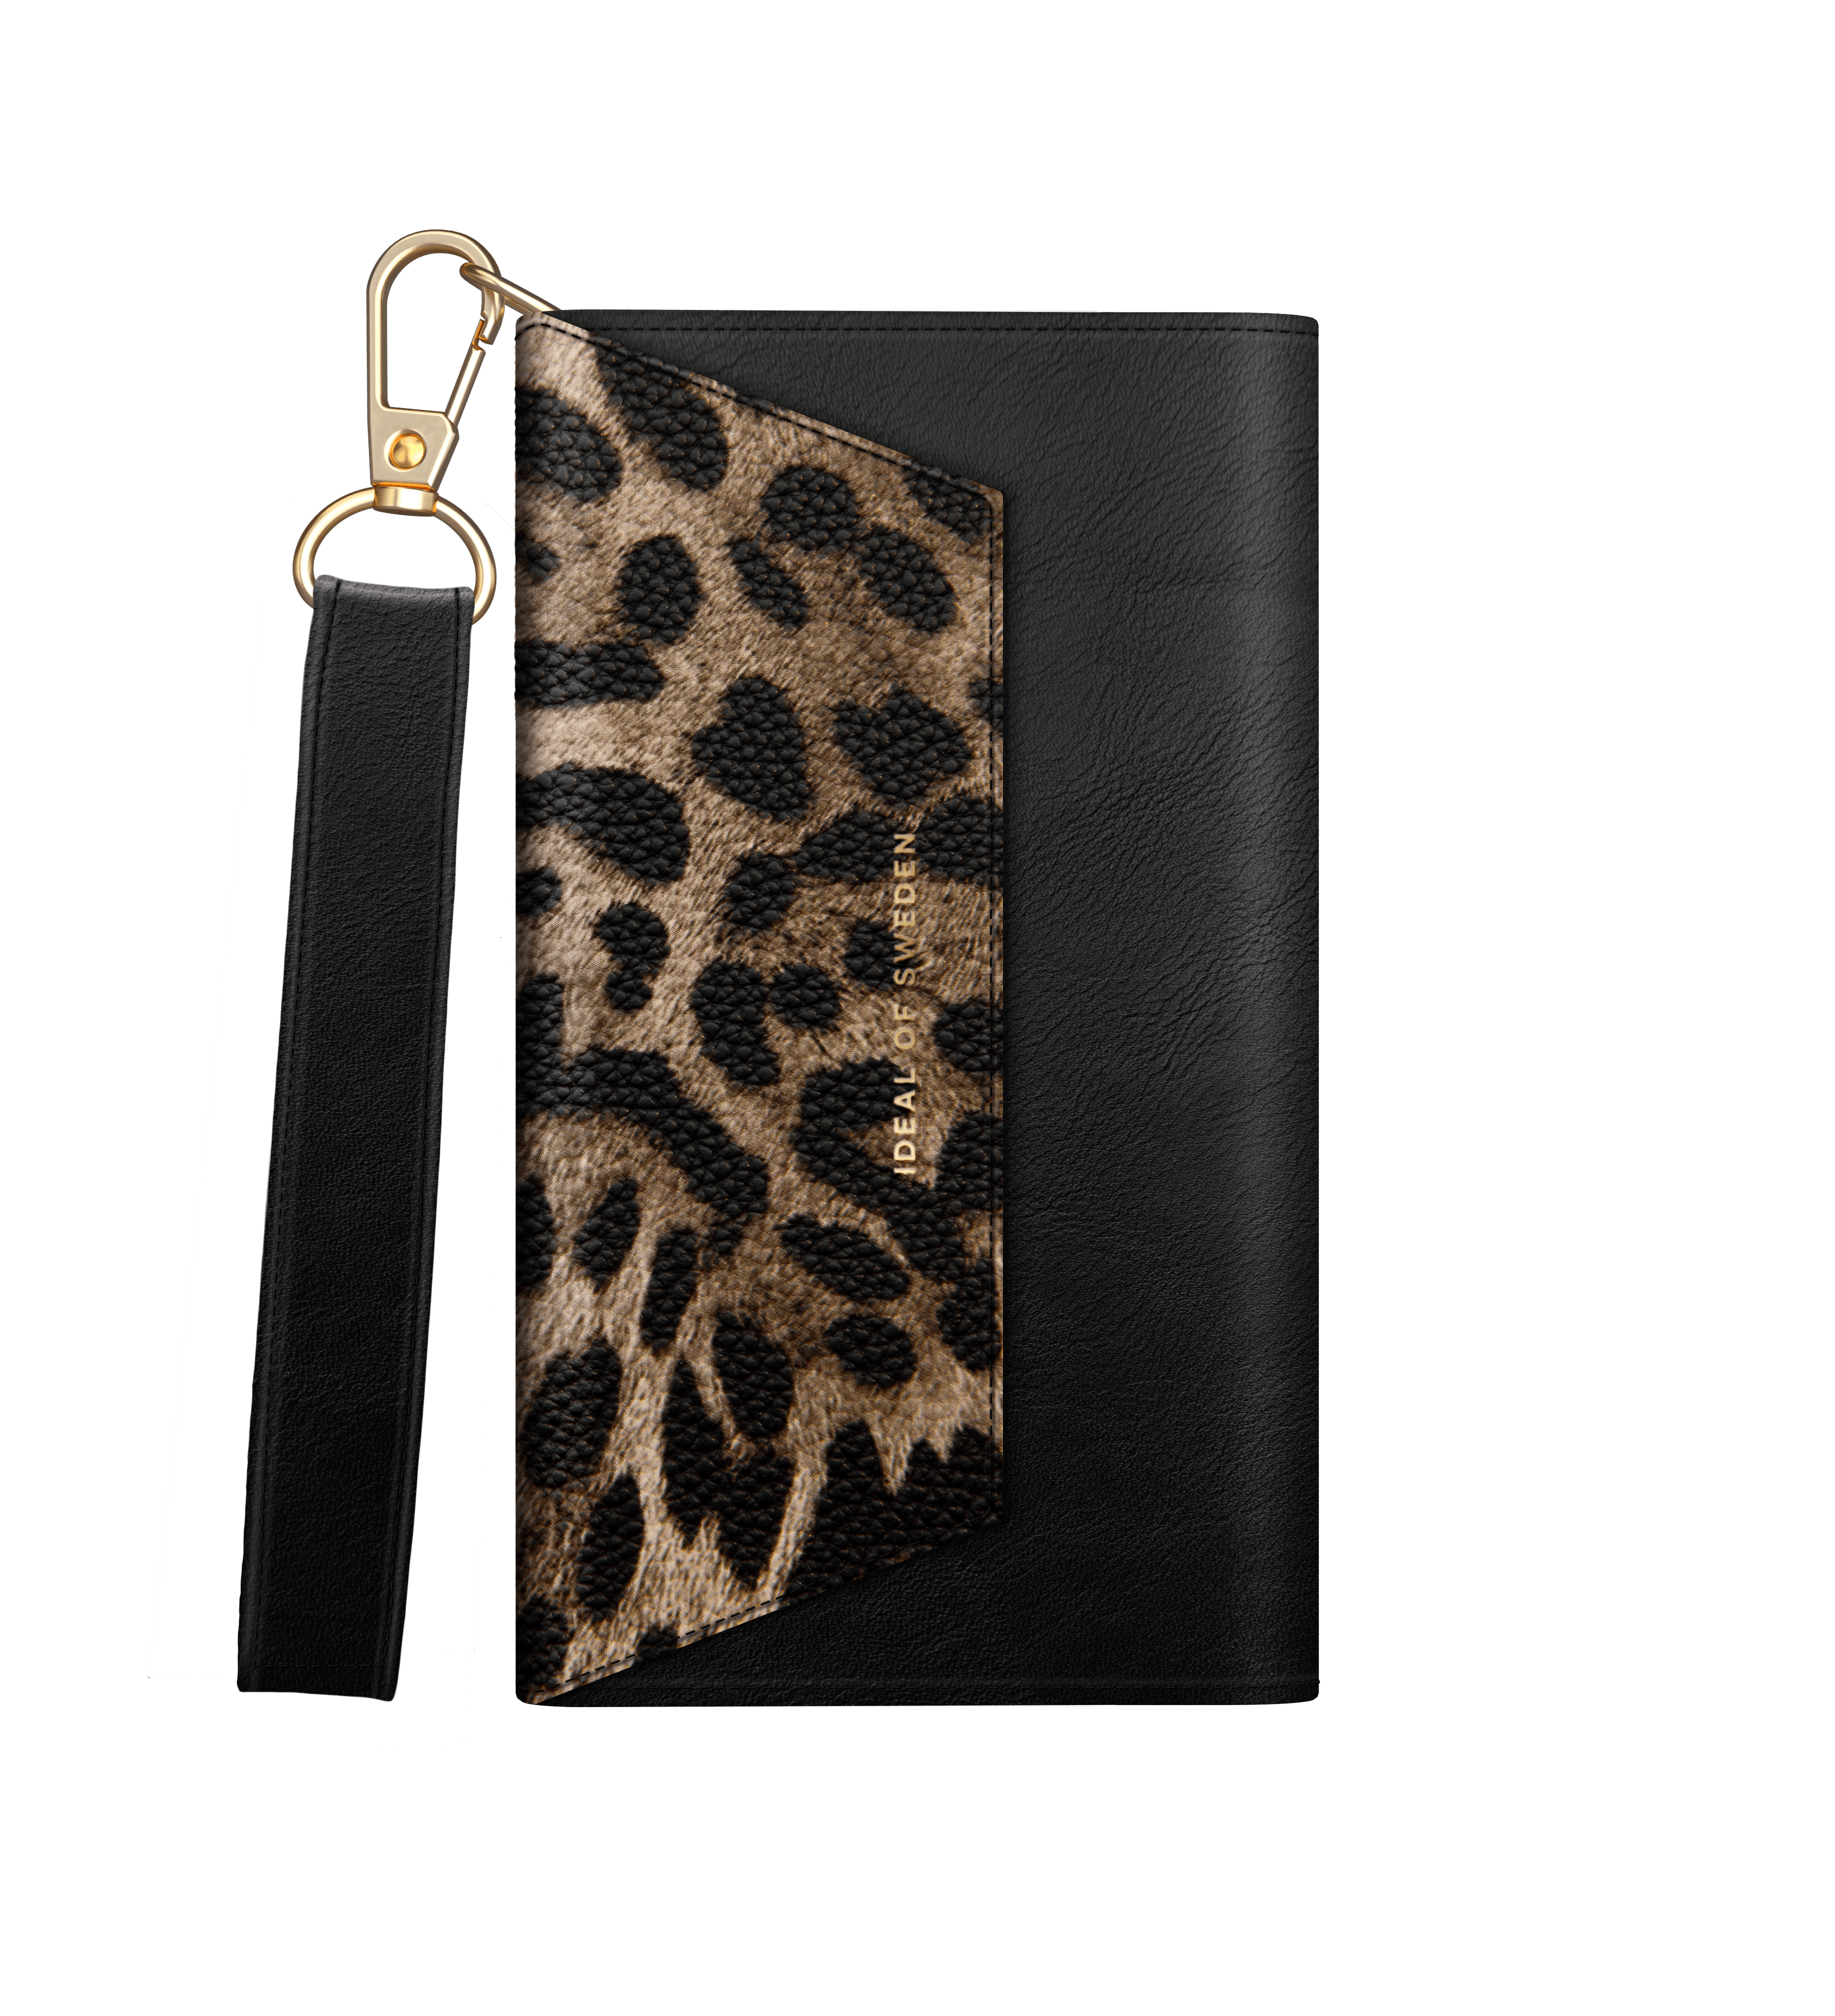 IDEAL OF SWEDEN Cassette Clutch Case for iPhone 12 and 12 pro - Midnight Leopard